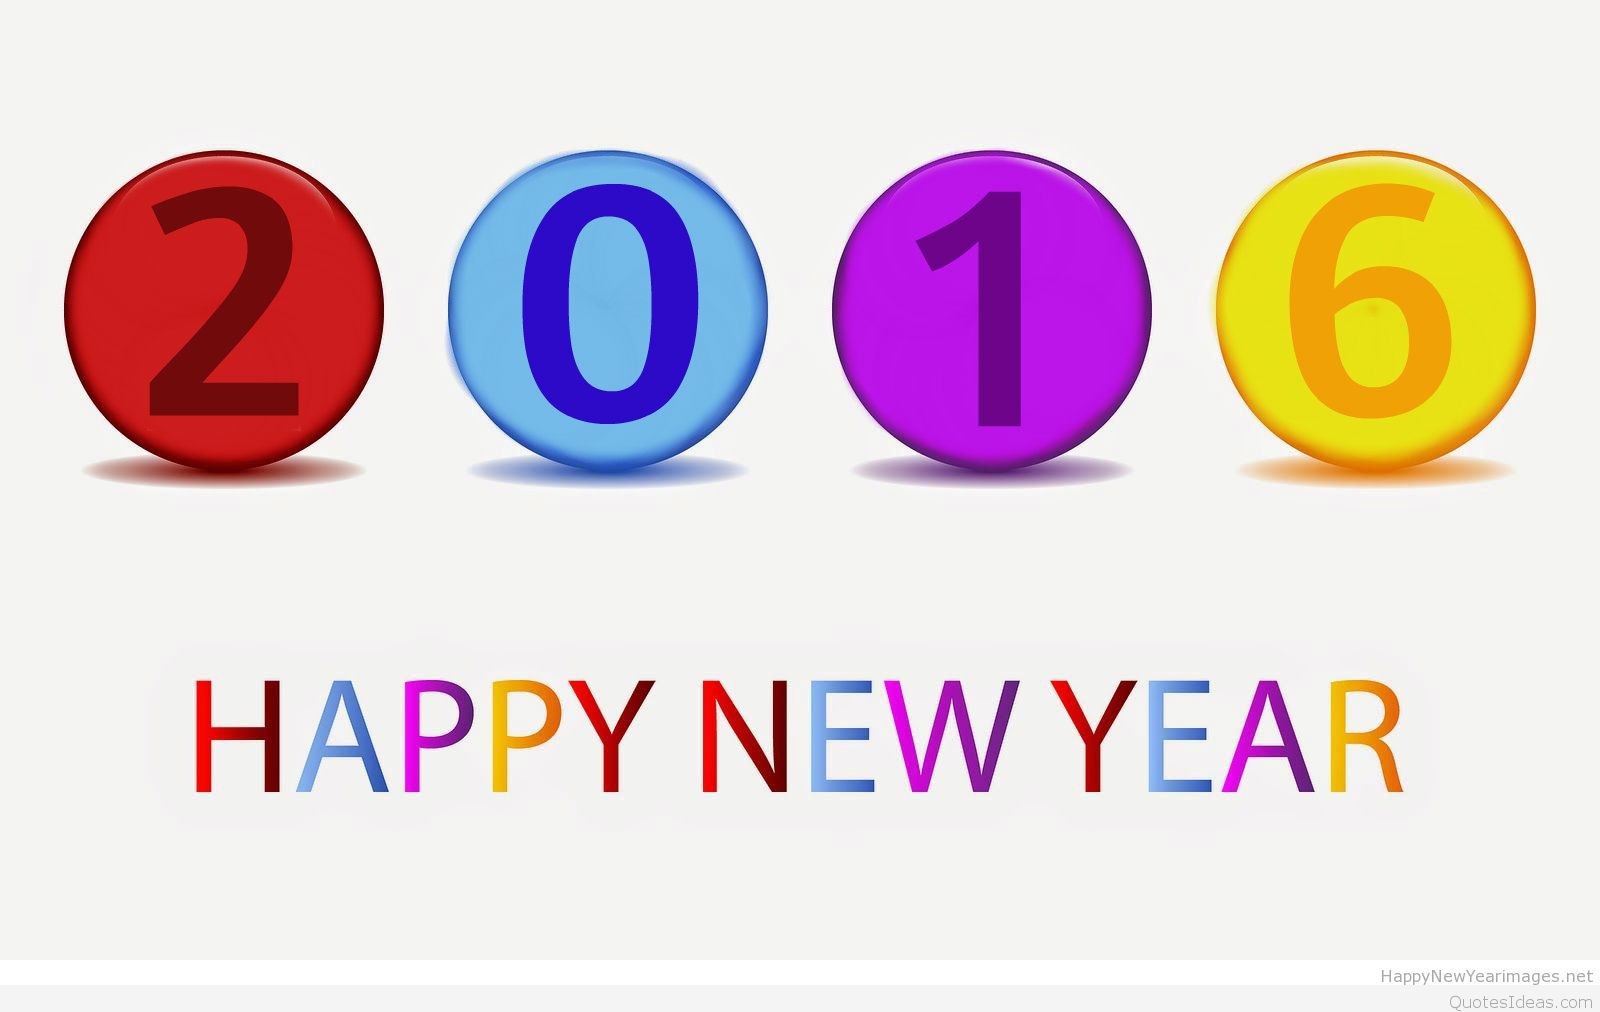 Free happy new year clipart images